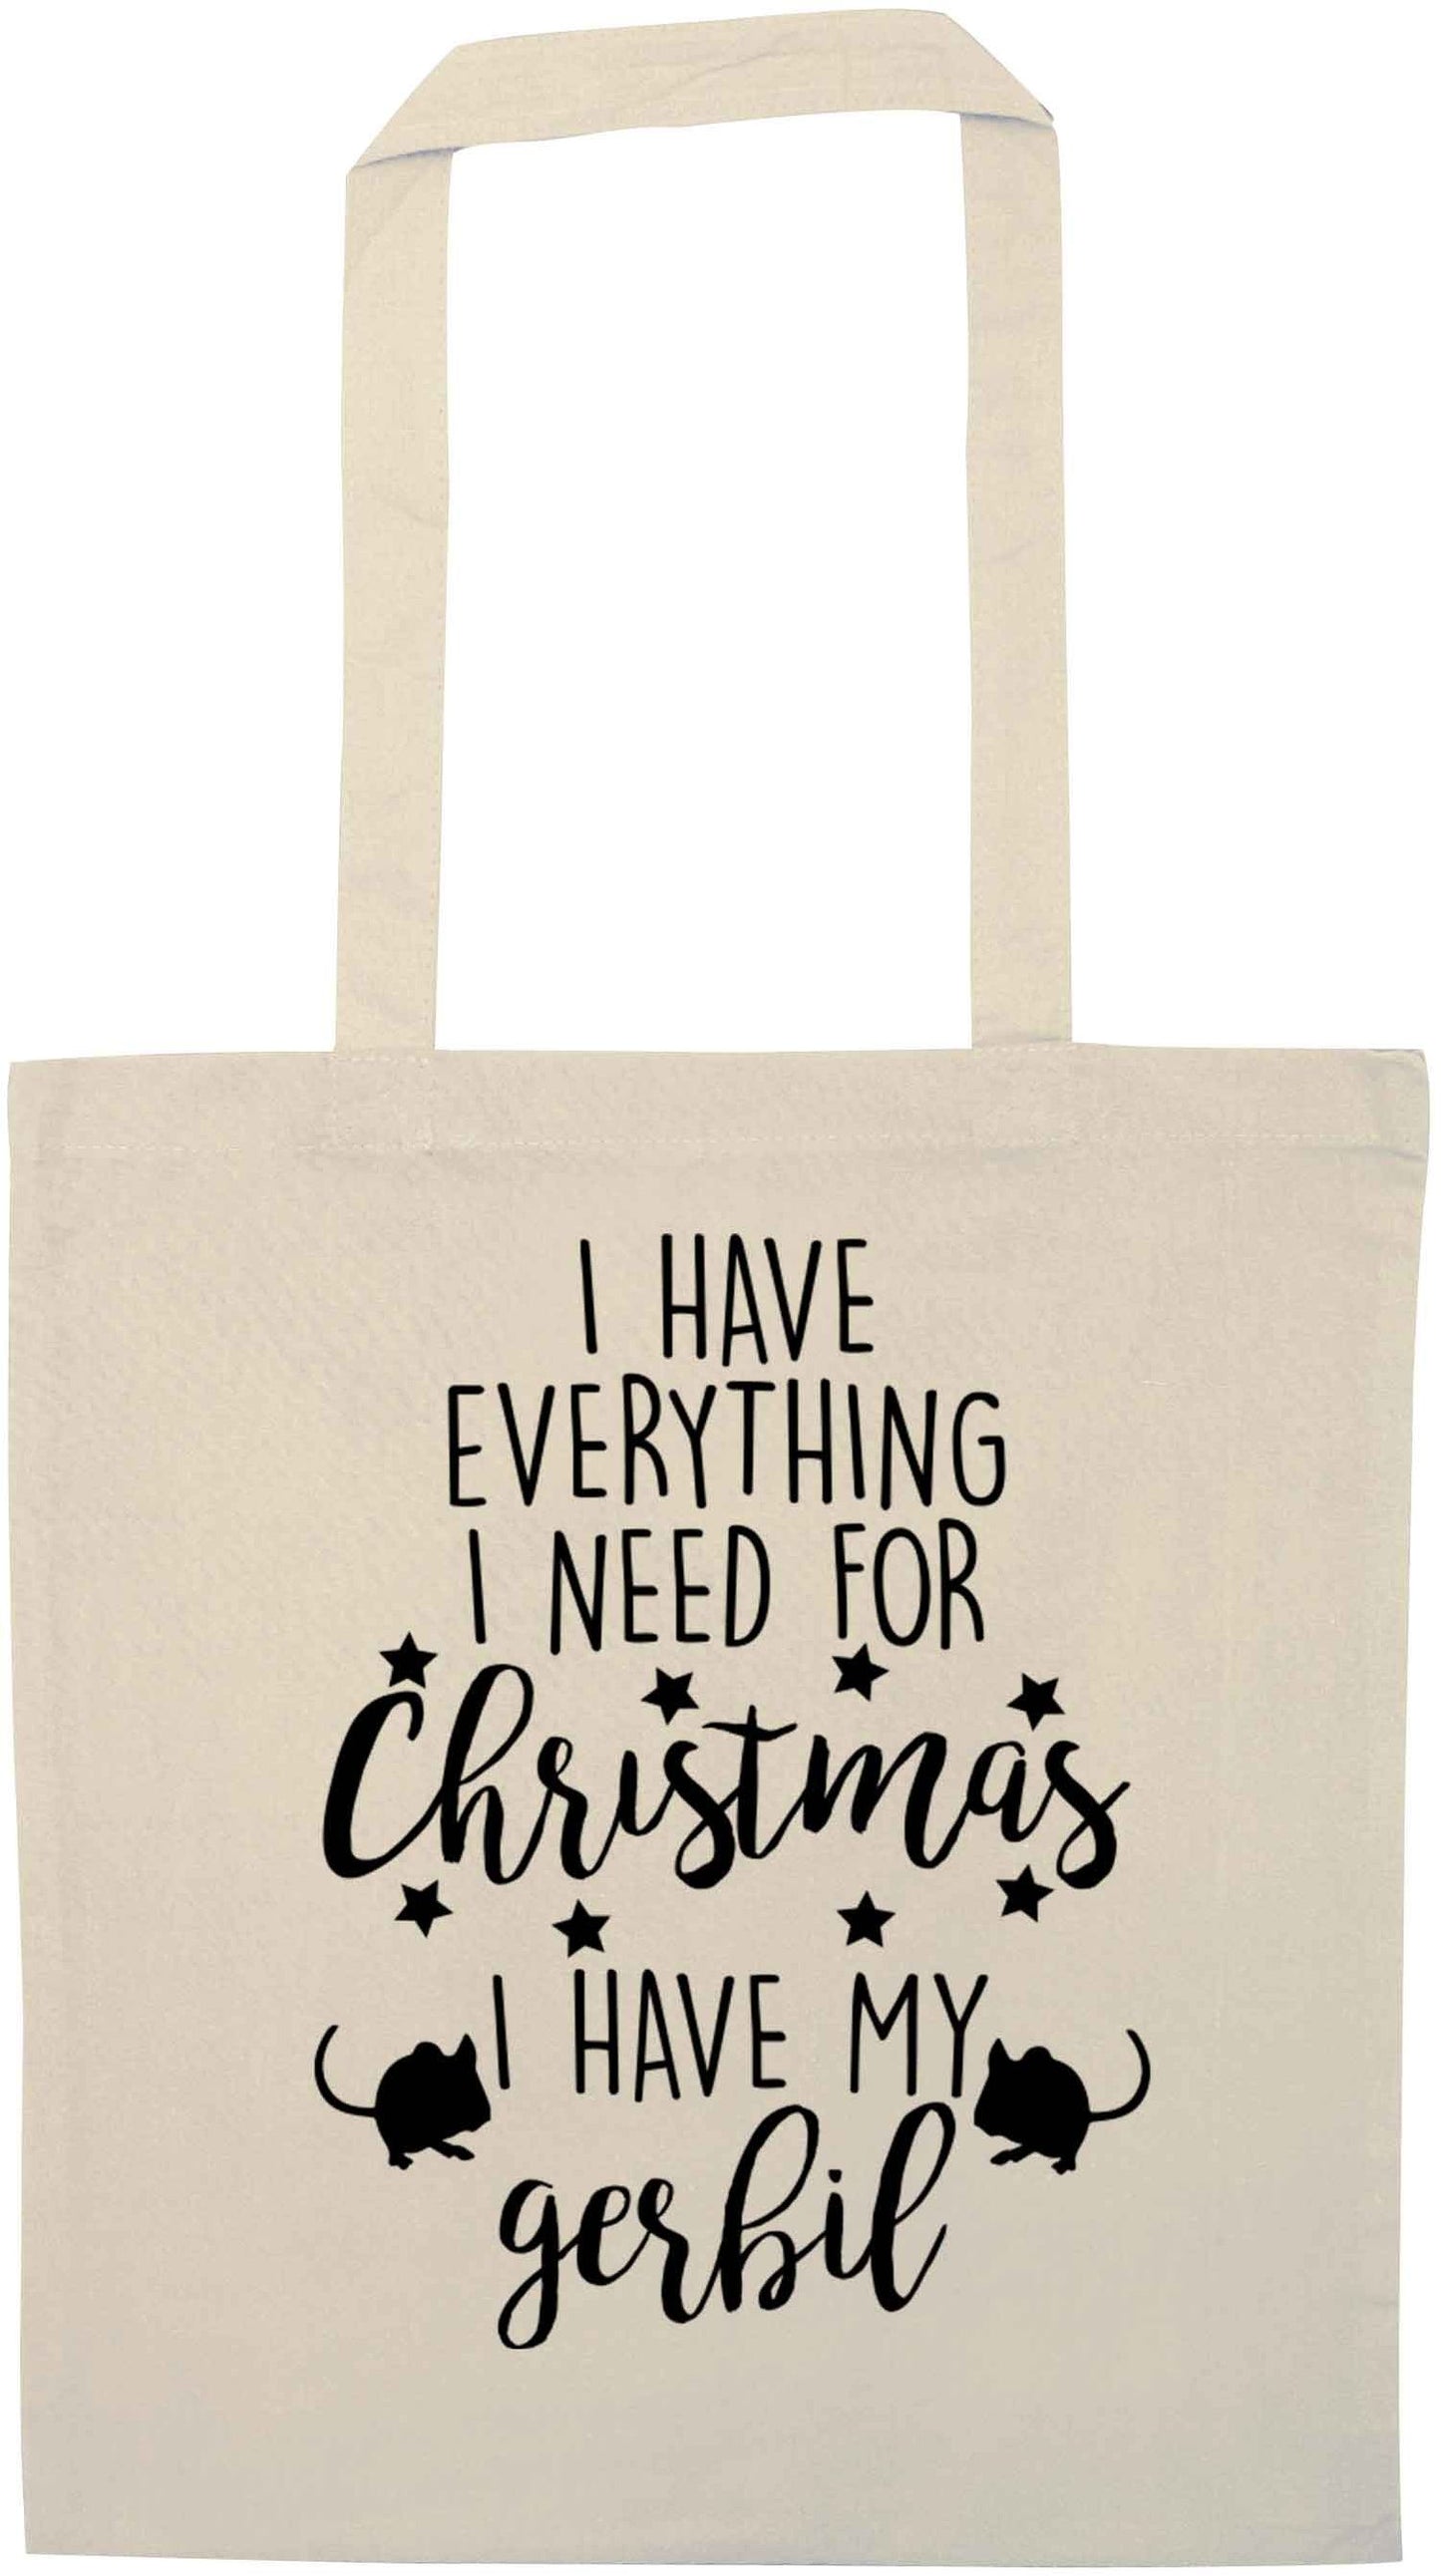 I have everything I need for Christmas I have my gerbil natural tote bag